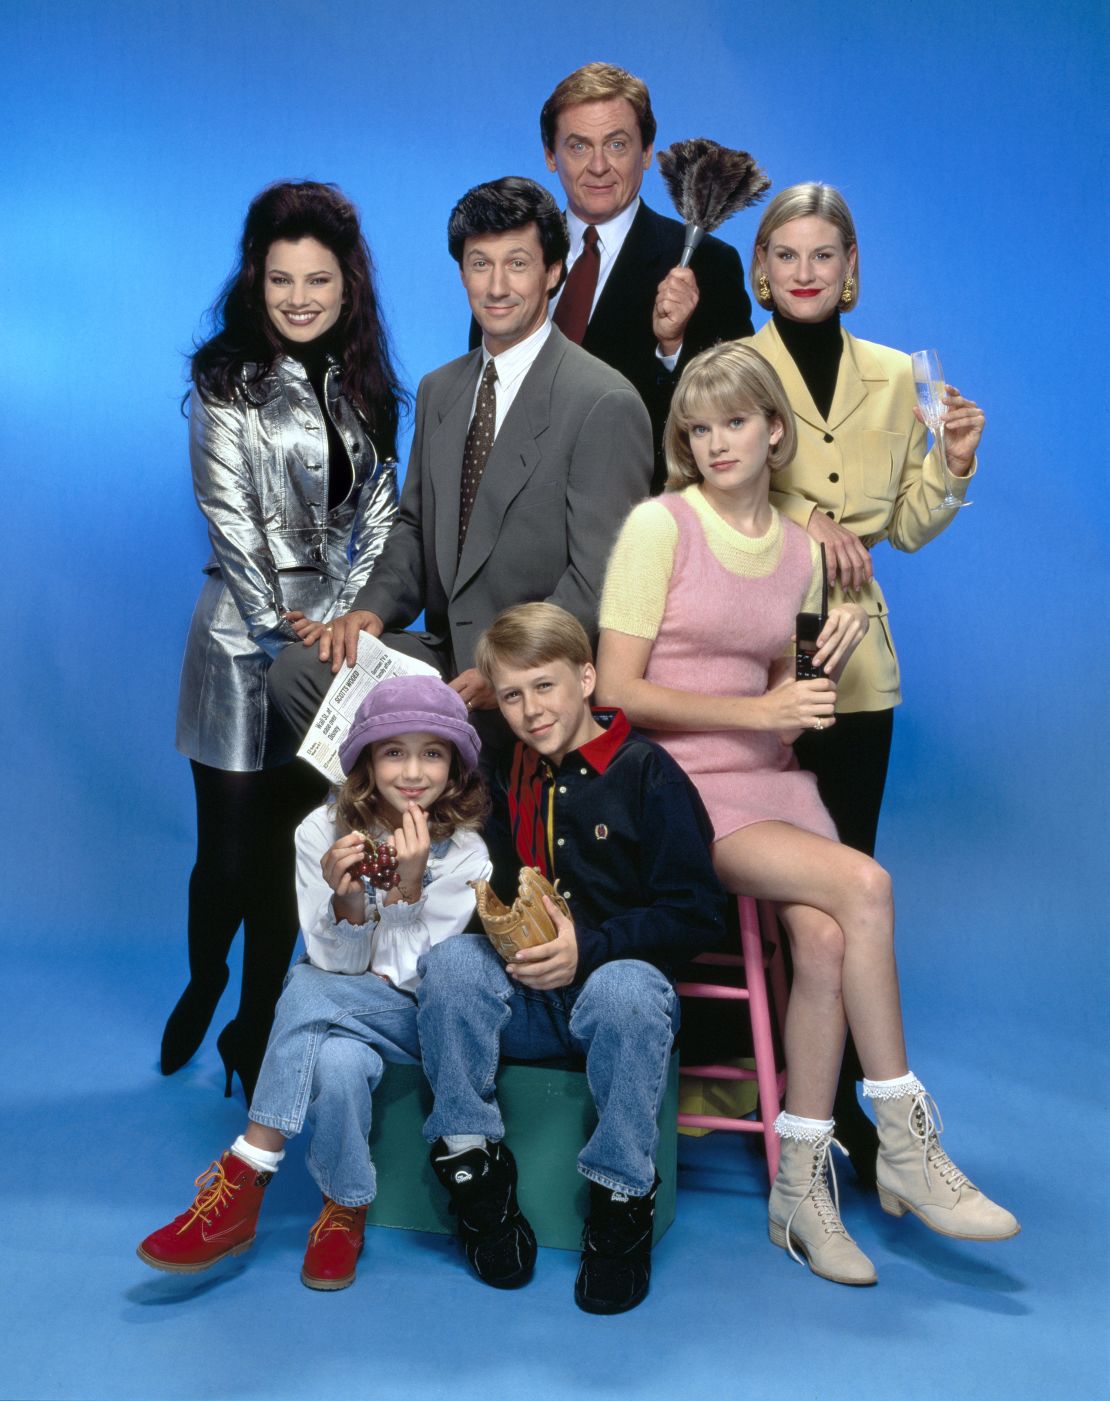 LOS ANGELES - JANUARY 1: The Nanny, a CBS television situation comedy. Premiere episode aired November 3, 1993. Pictured is from left is Fran Drescher (as Fran Fine), Charles Shaughnessy (as Maxwell Sheffield); Daniel Davis (as Niles); Lauren Lane (as C.C. Babcock). Seated in front from left is Madeline Zima (as Grace Sheffield); Benjamin Salisbury (as Brighton Sheffield); and Nicholle Tom (as Margaret 'Maggie' Sheffield). Image dated January 1, 1993. (Photo by CBS via Getty Images)